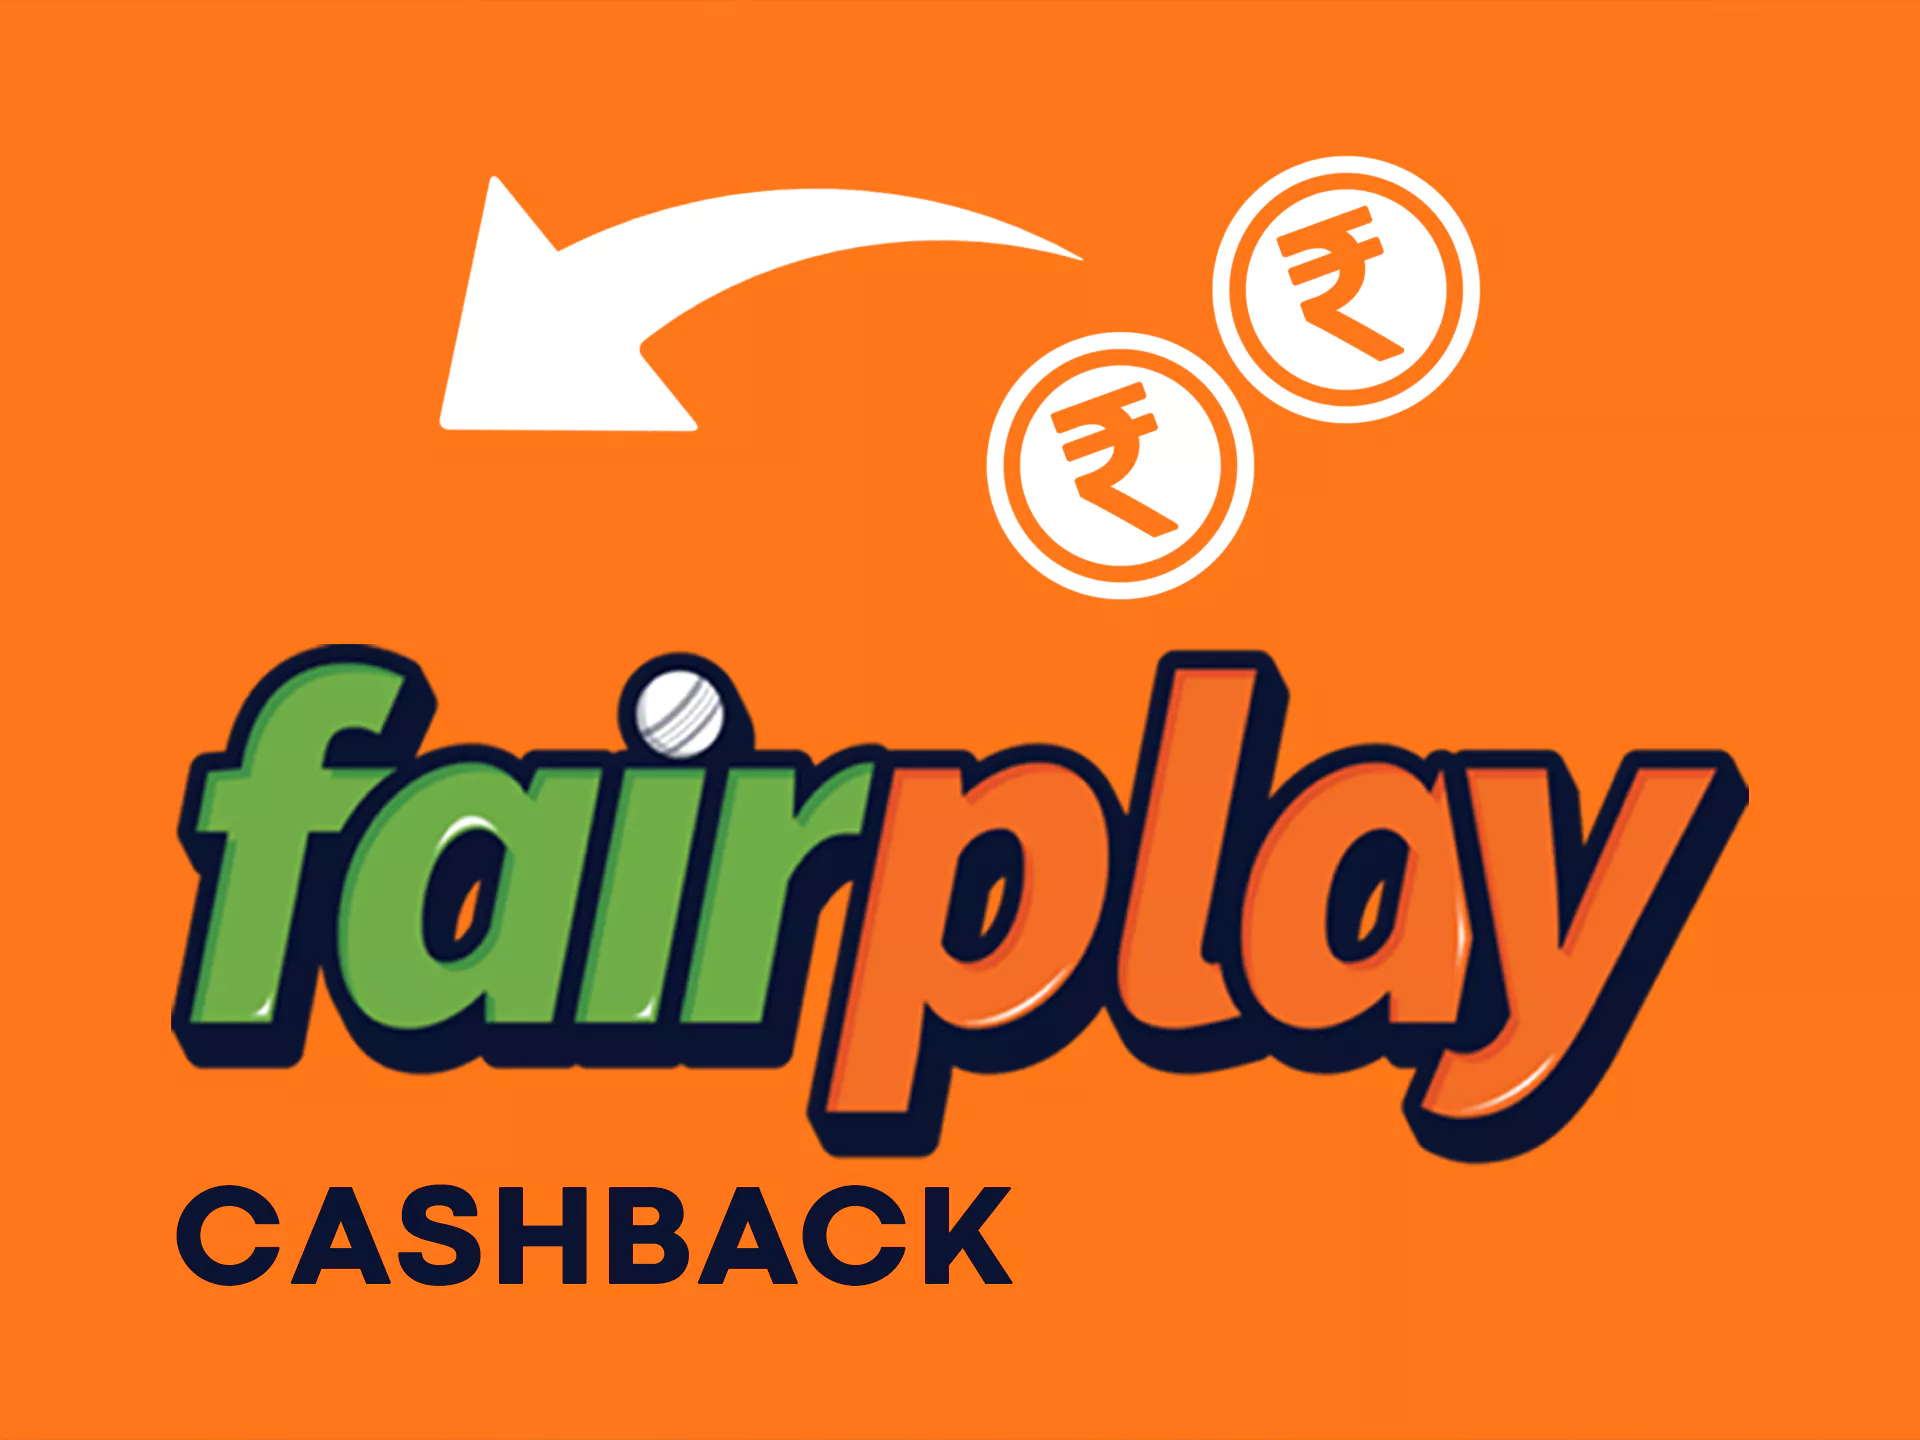 Fairplay have exclusive VIP cashback, Earn money after deposits and bets at Fairplay.